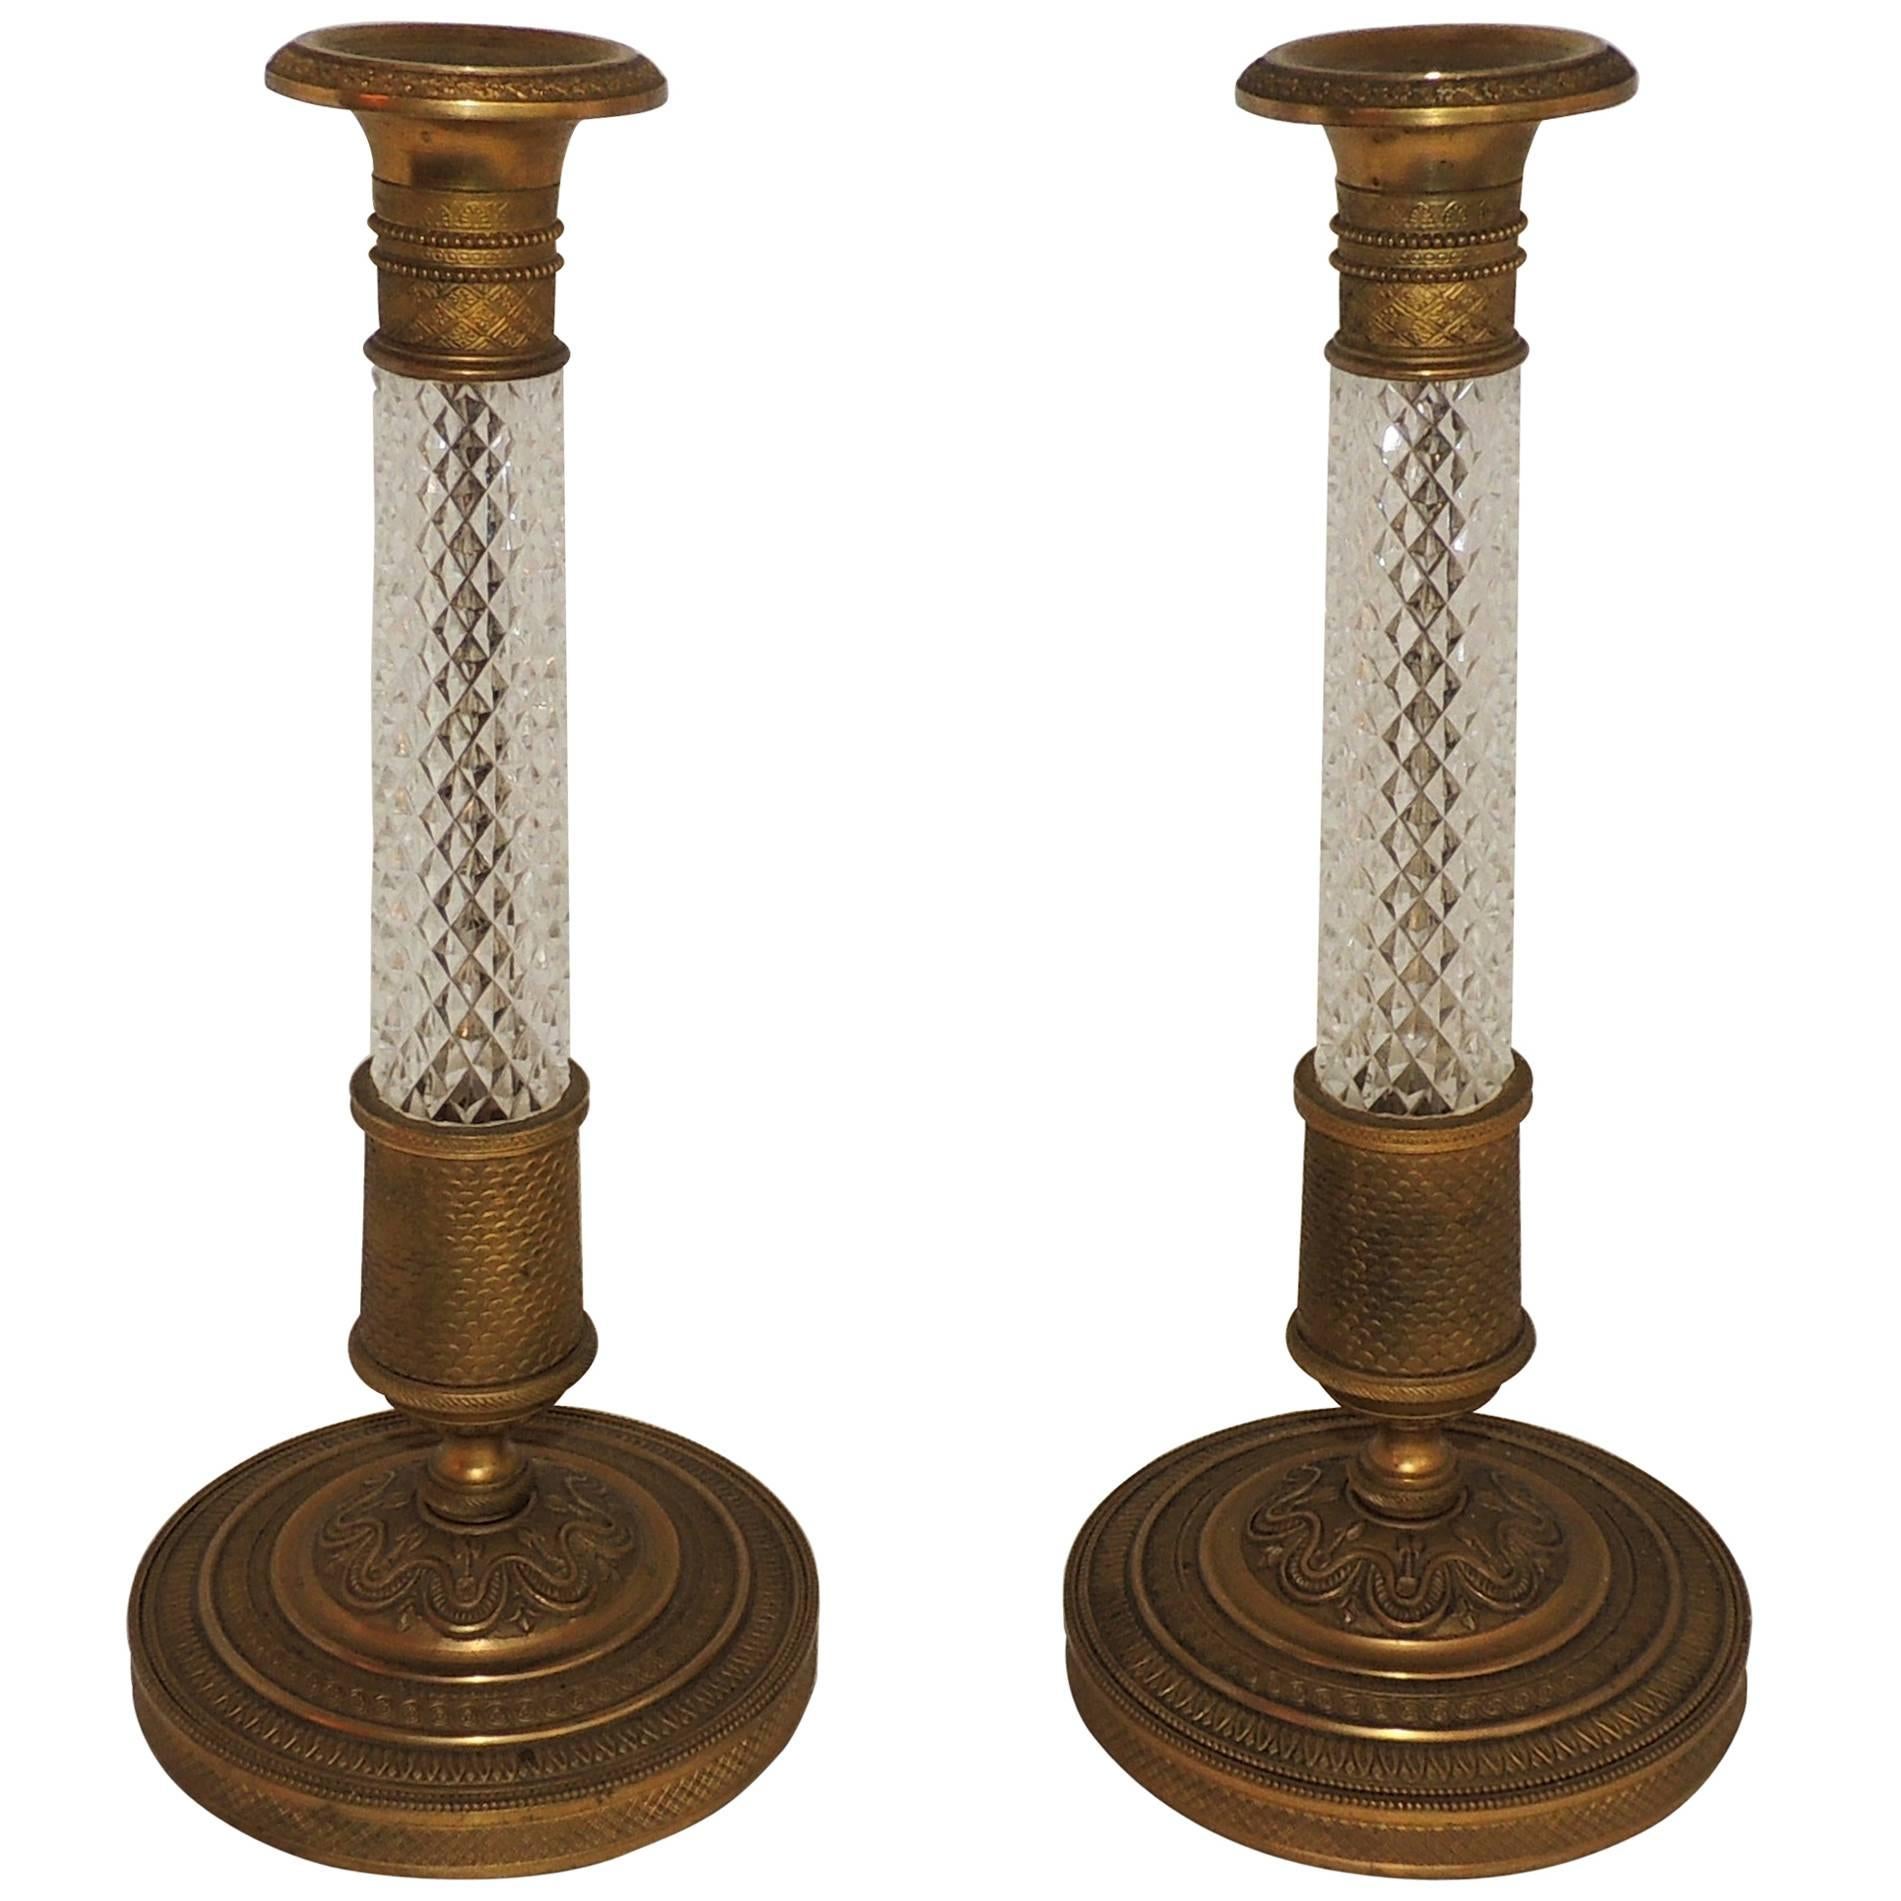 Fine Pair of French Empire Dore Bronze & Cut Crystal Ormolu-Mounted Candlesticks